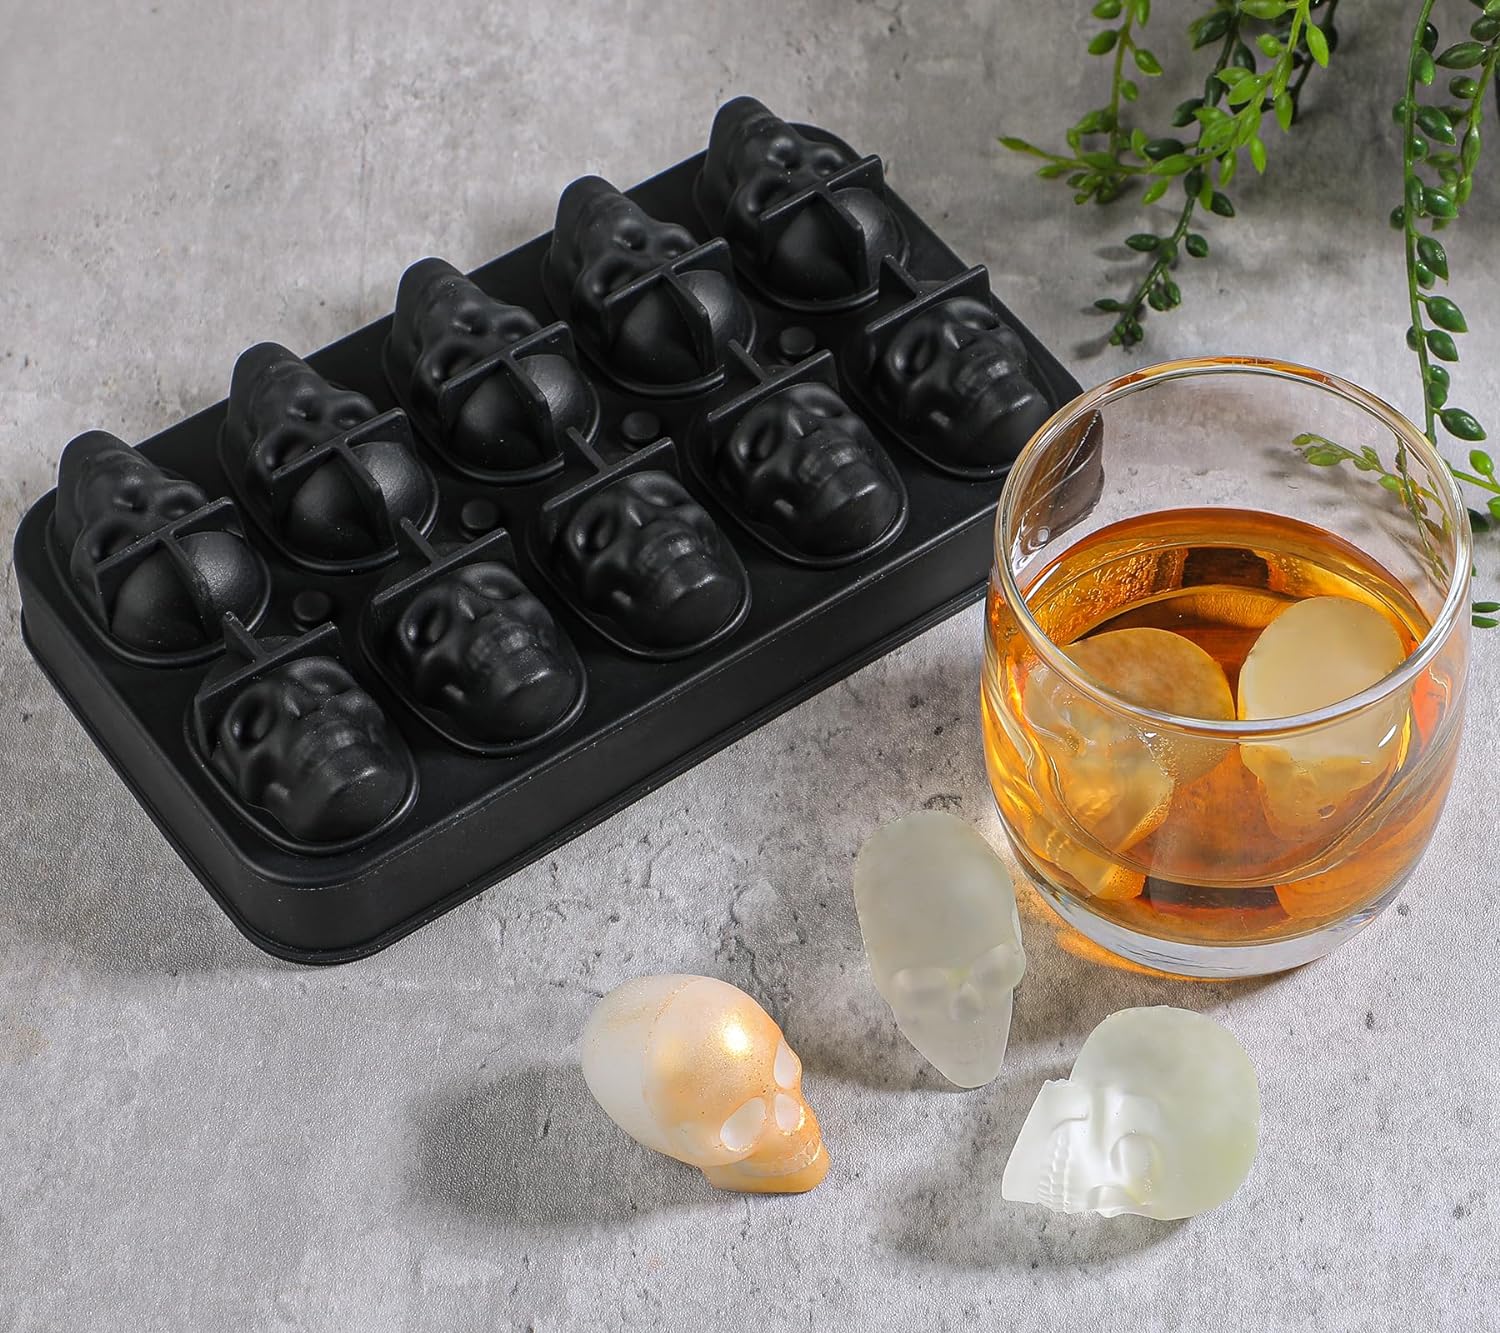 Webake Skull Ice Cube Mold, 10 Cavity Silicone Ice Mold with Lid for Whiskey  Skull Ice